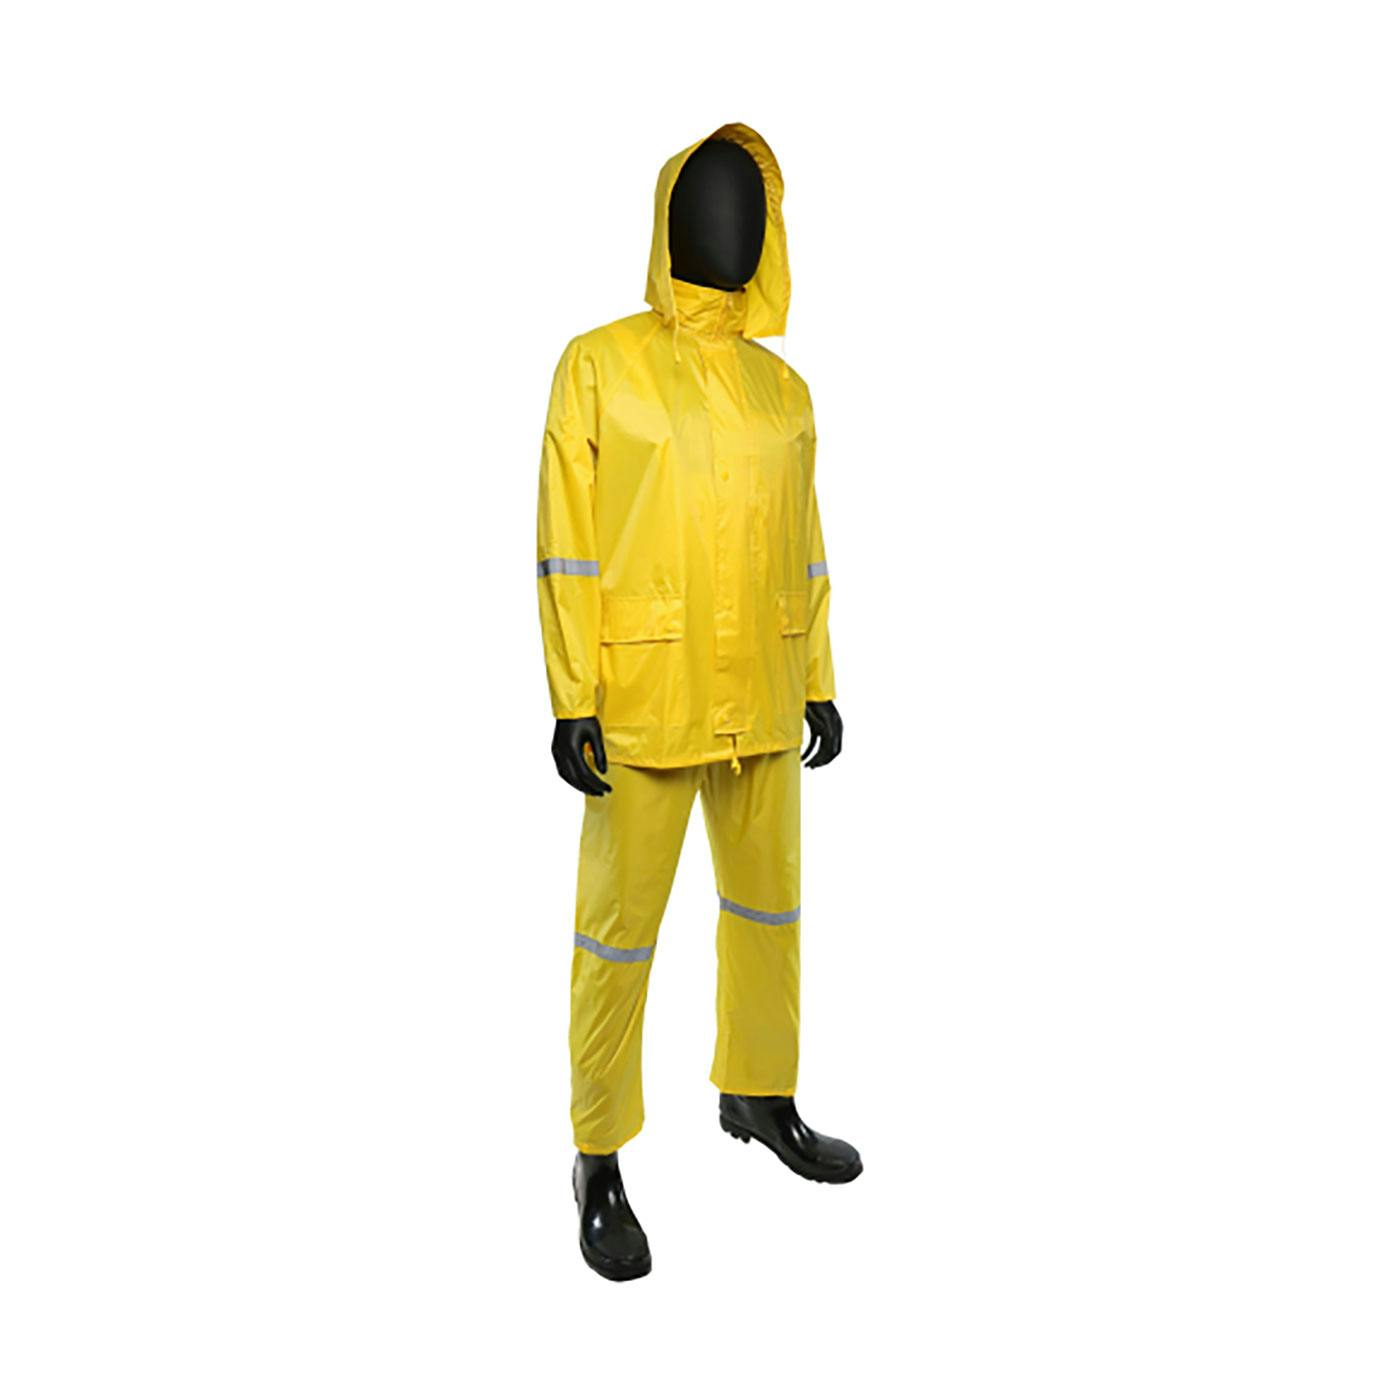 Three-Piece Rain Suit with Reflective Stripes - 0.18 mm, Yellow (4338)